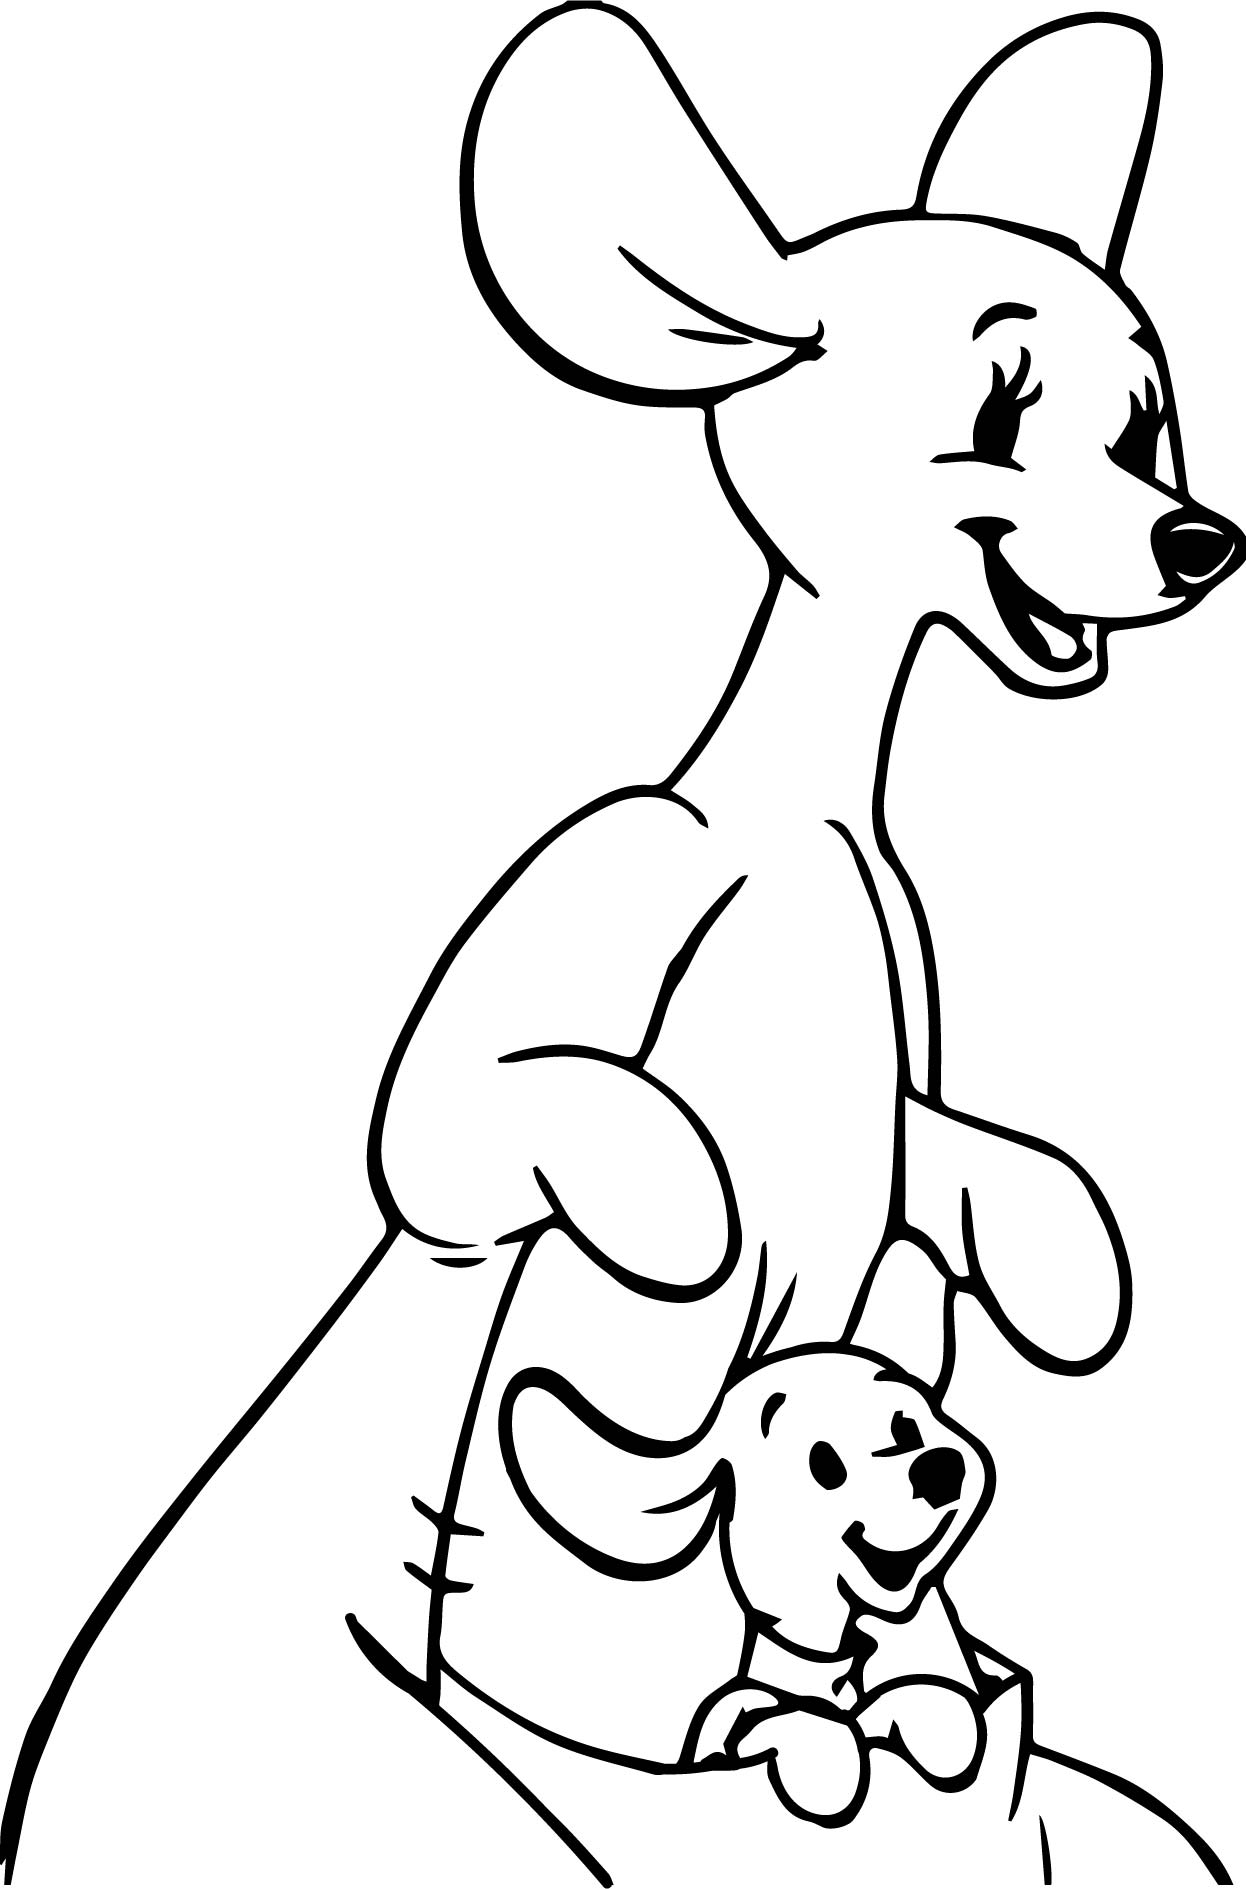 coloring-pages-happy-kangaroo-coloring-pages